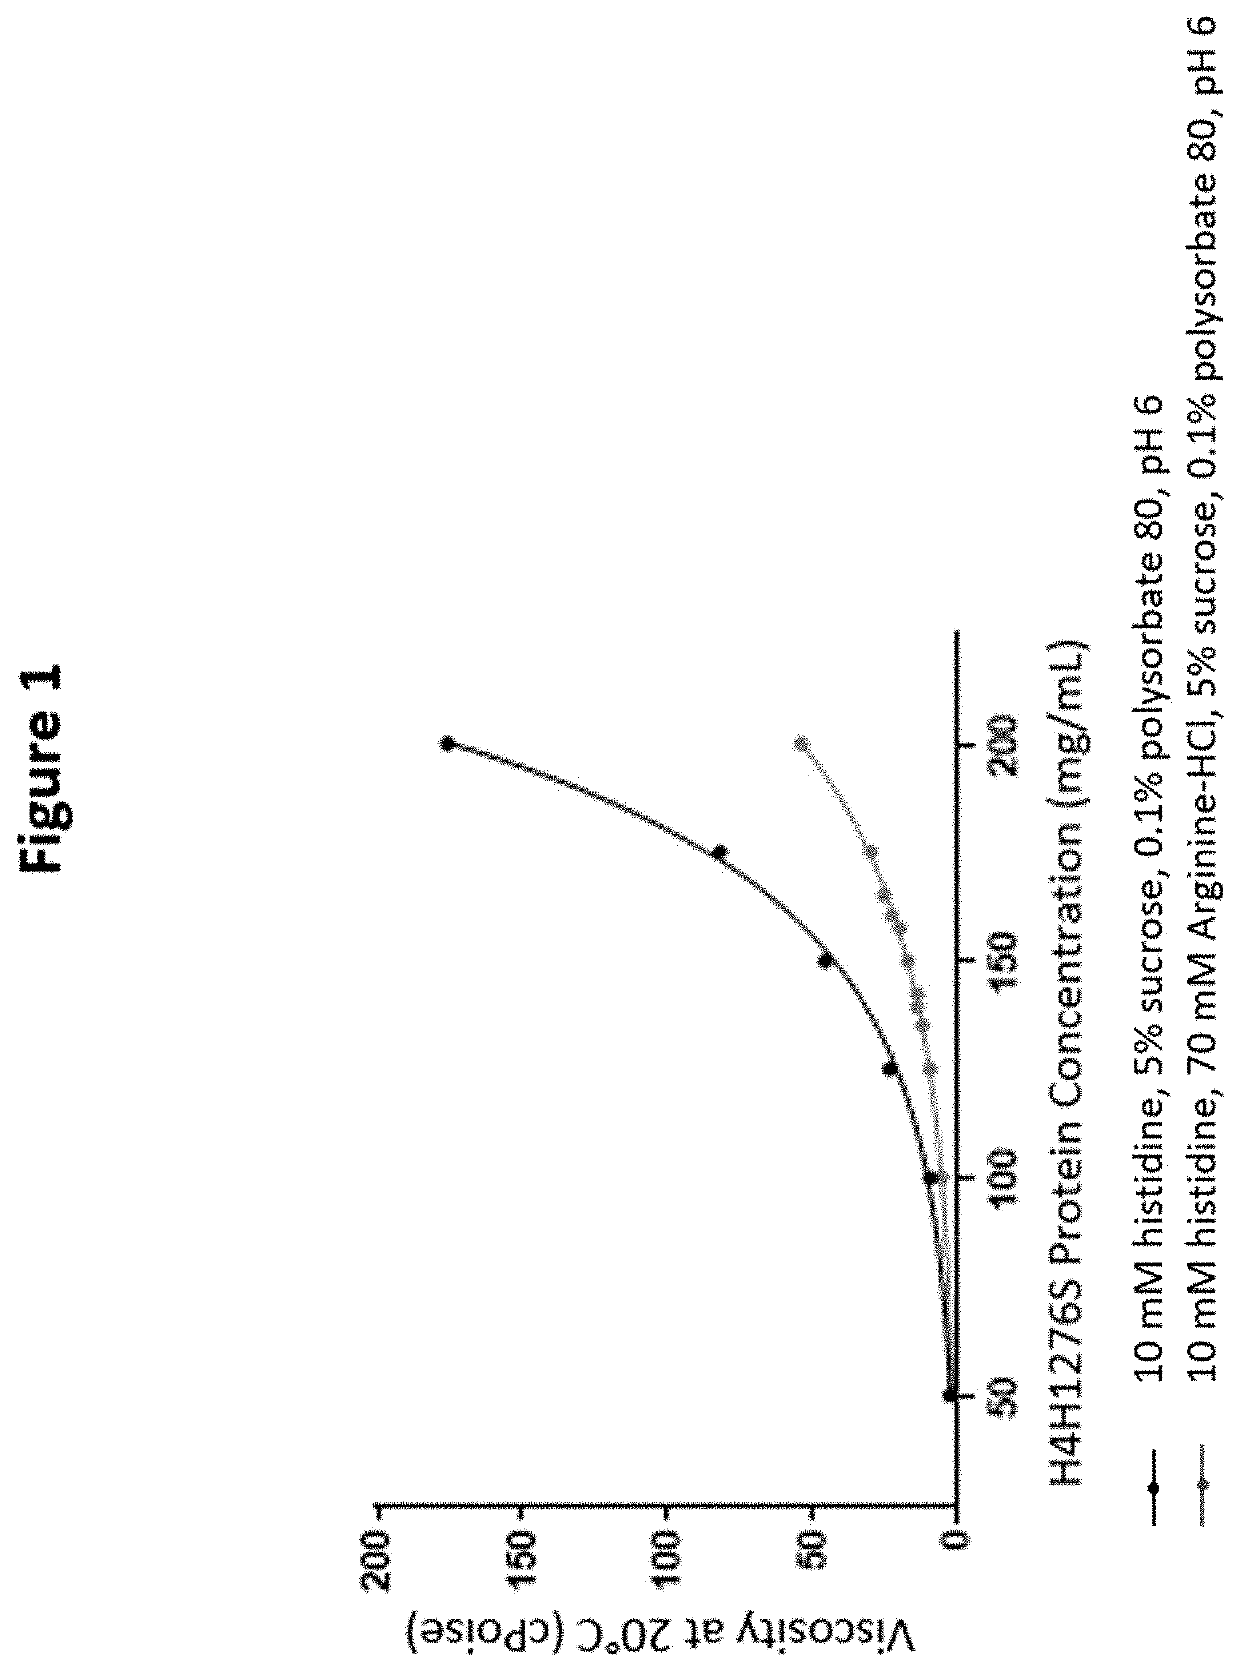 Stabilized formulations containing Anti-angptl3 antibodies